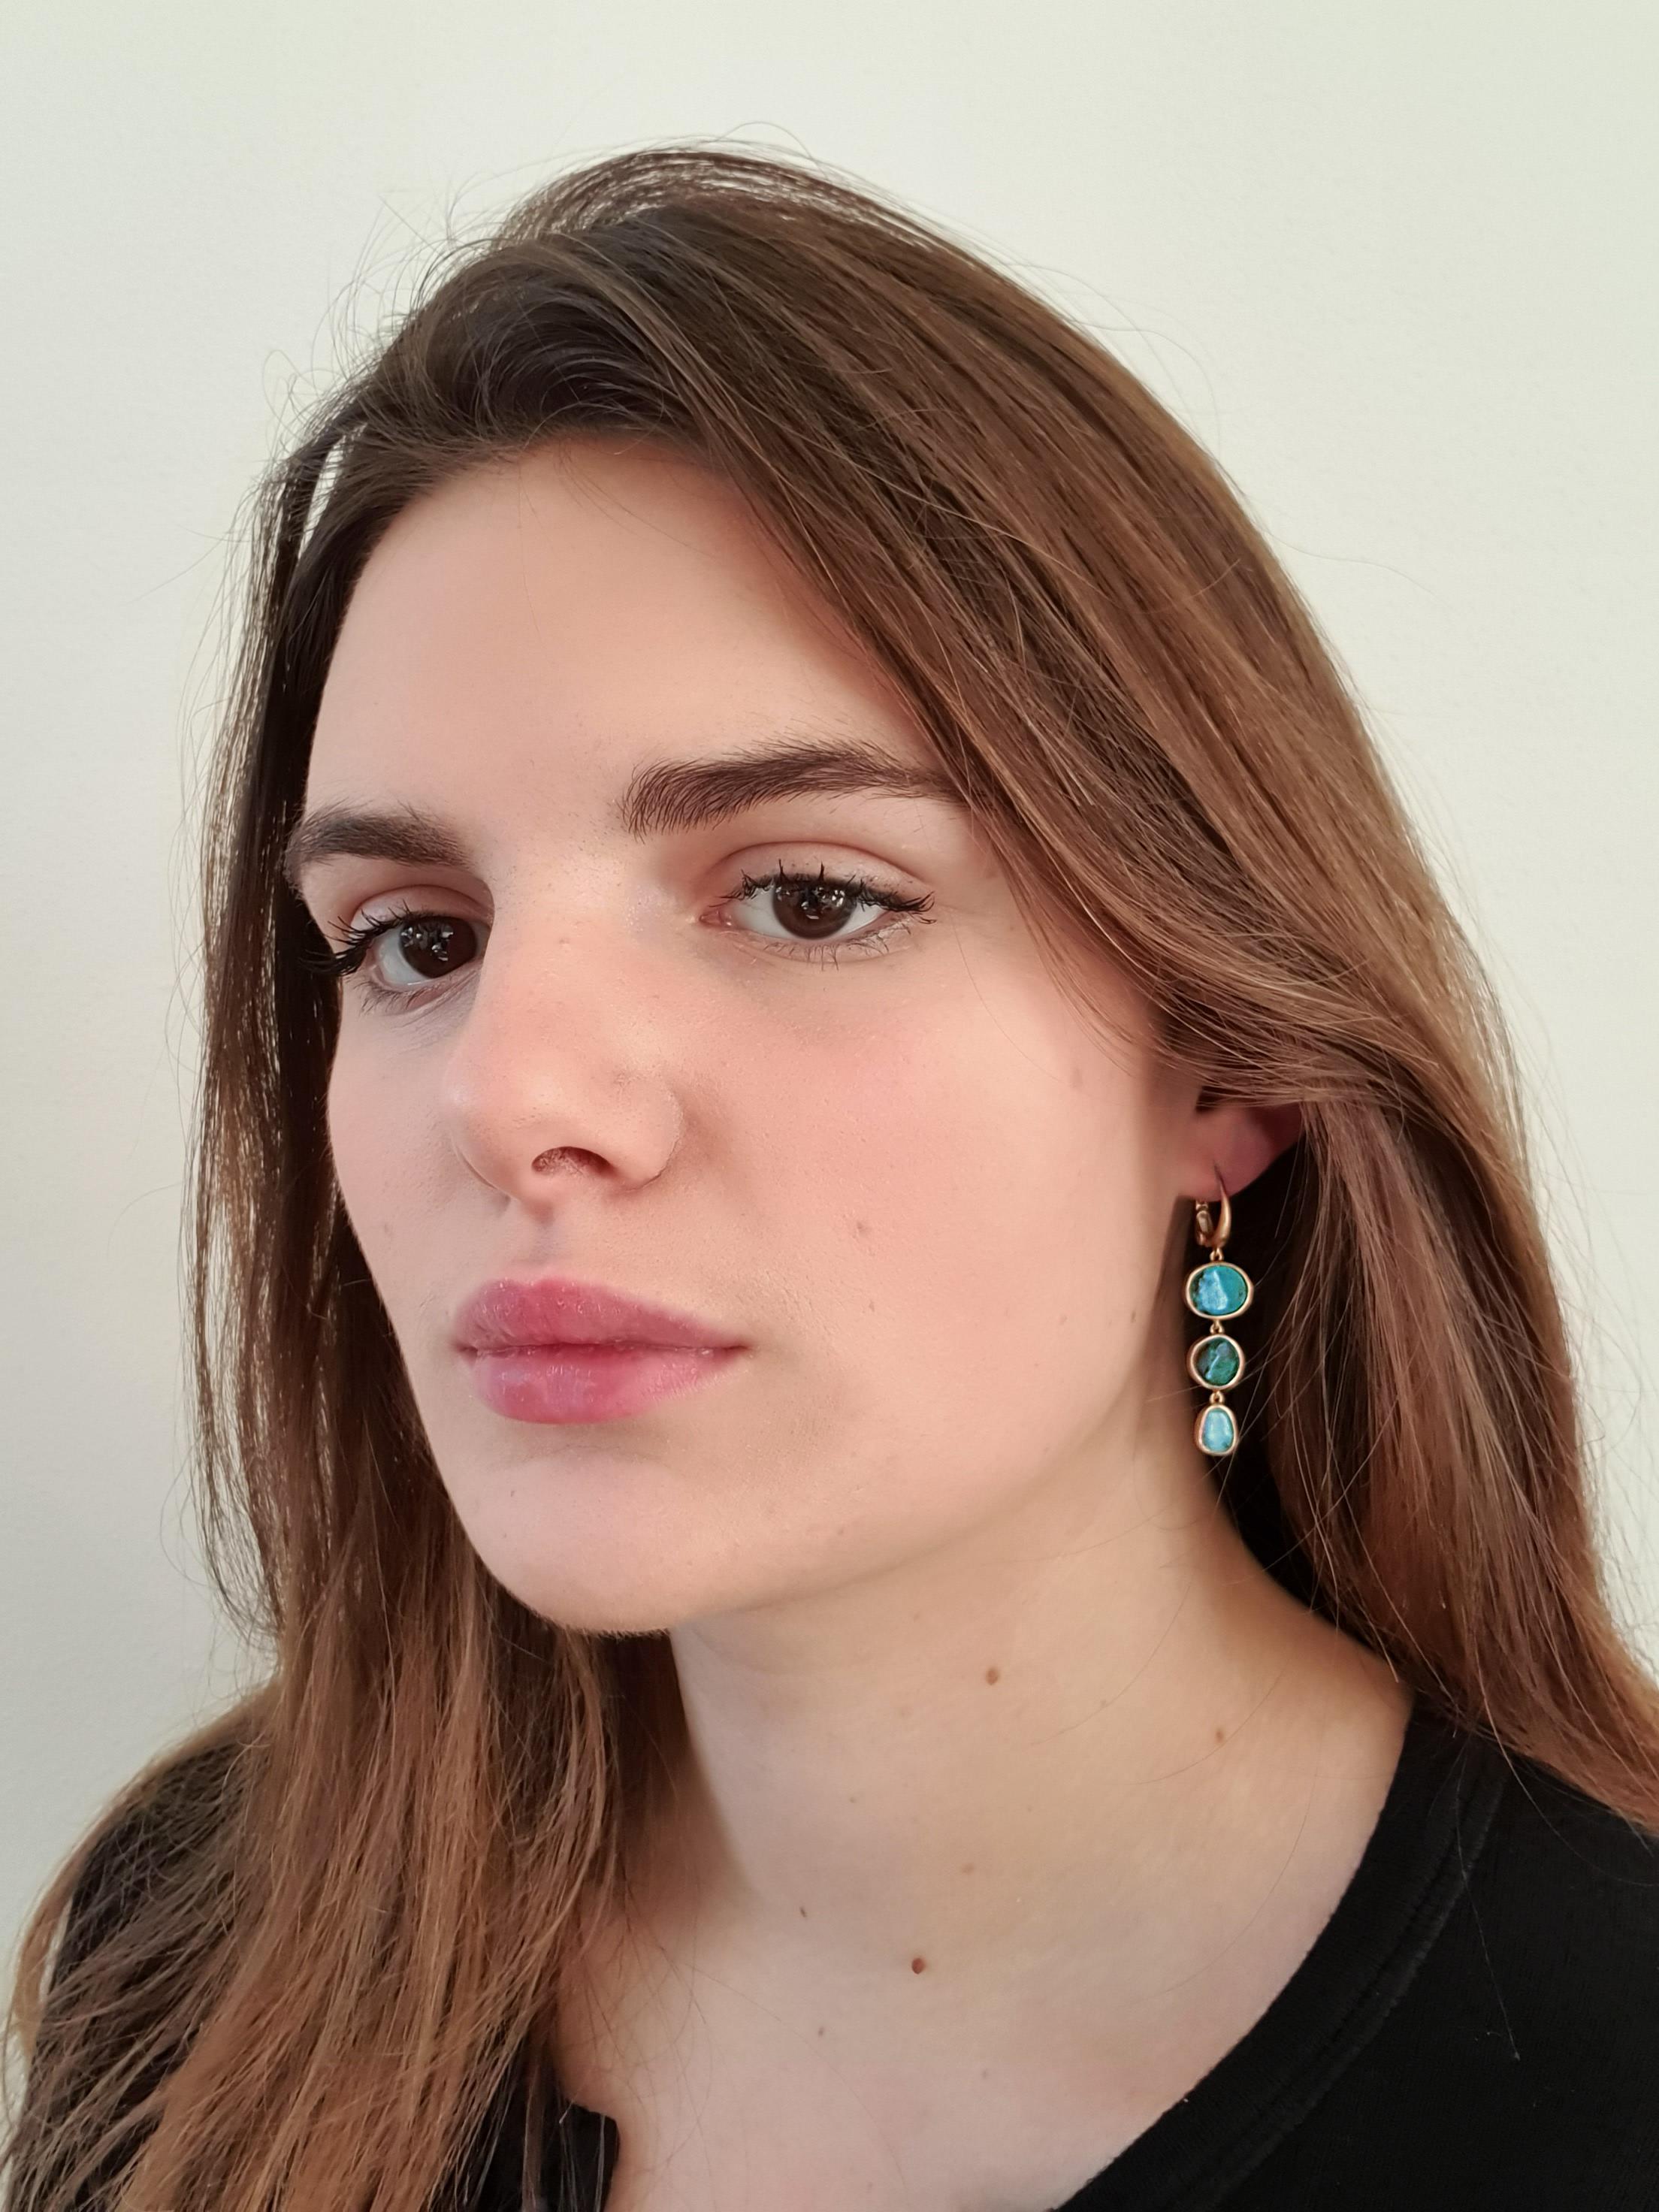 Dalben design One of a kind 18k yellow gold semi lucid finishing dangle earrings with six blue - green bezel set Australian Boulder Opals weighing 9,6 carats.  
max width 11-12 mm 
height without leverback 32 mm
height with leverback 47 mm  
The